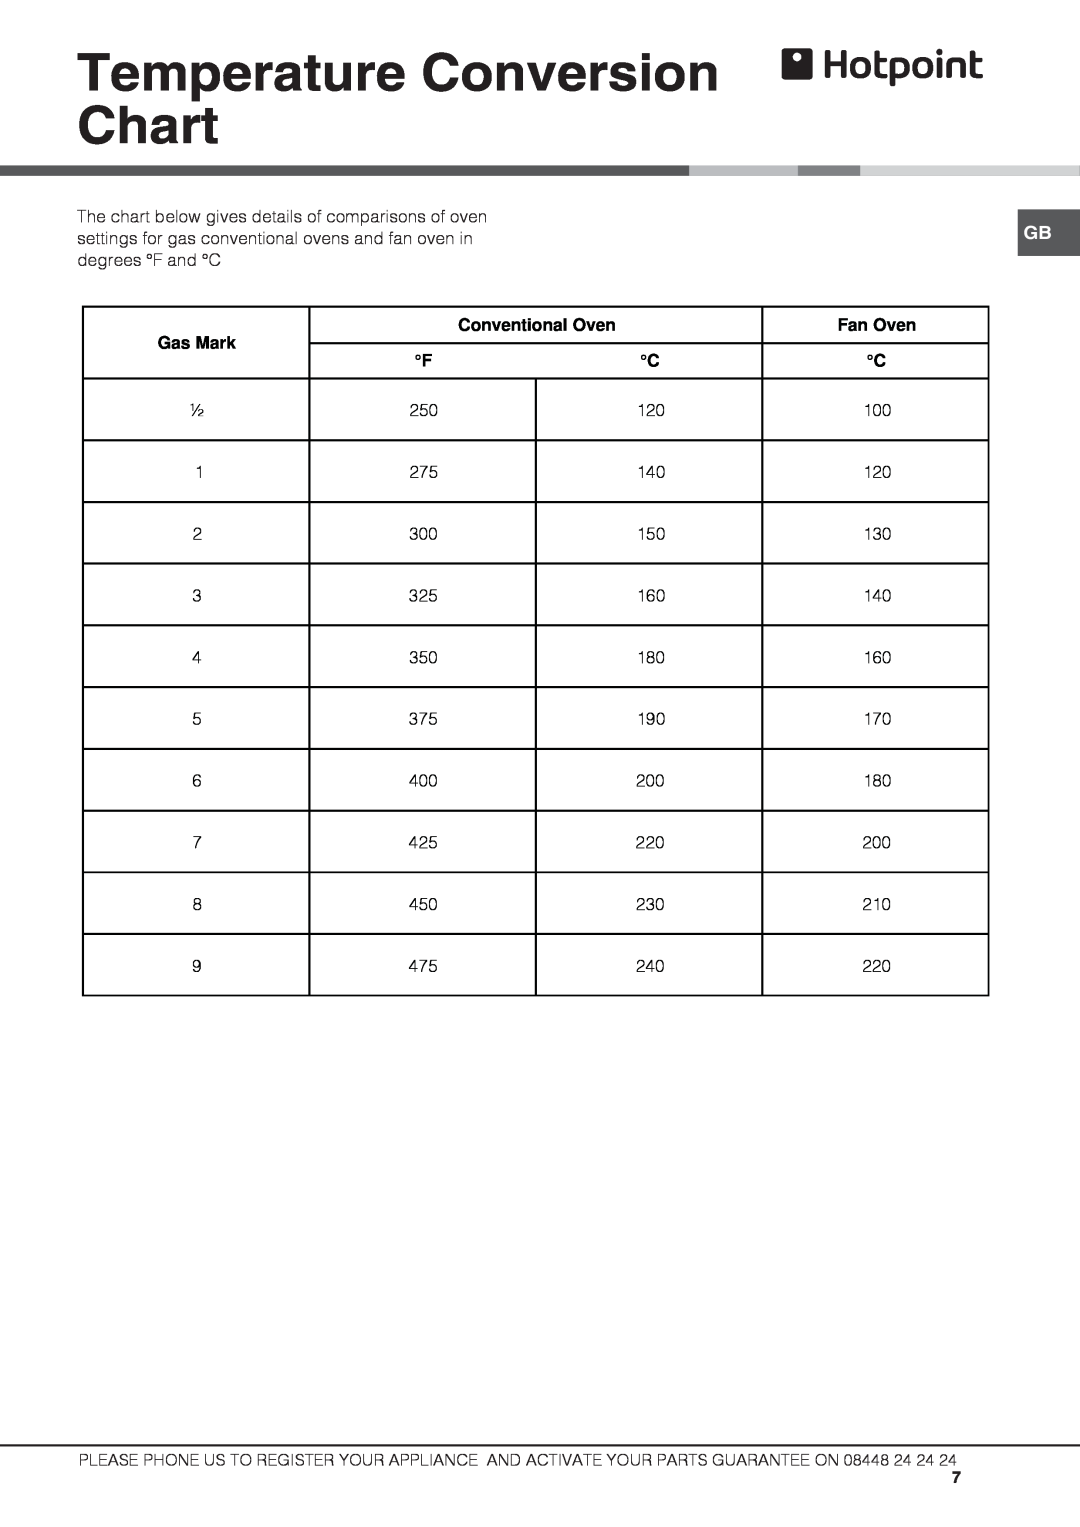 Hotpoint DBS 539 CK S manual Temperature Conversion Chart, The chart below gives details of comparisons of oven, Gas Mark 